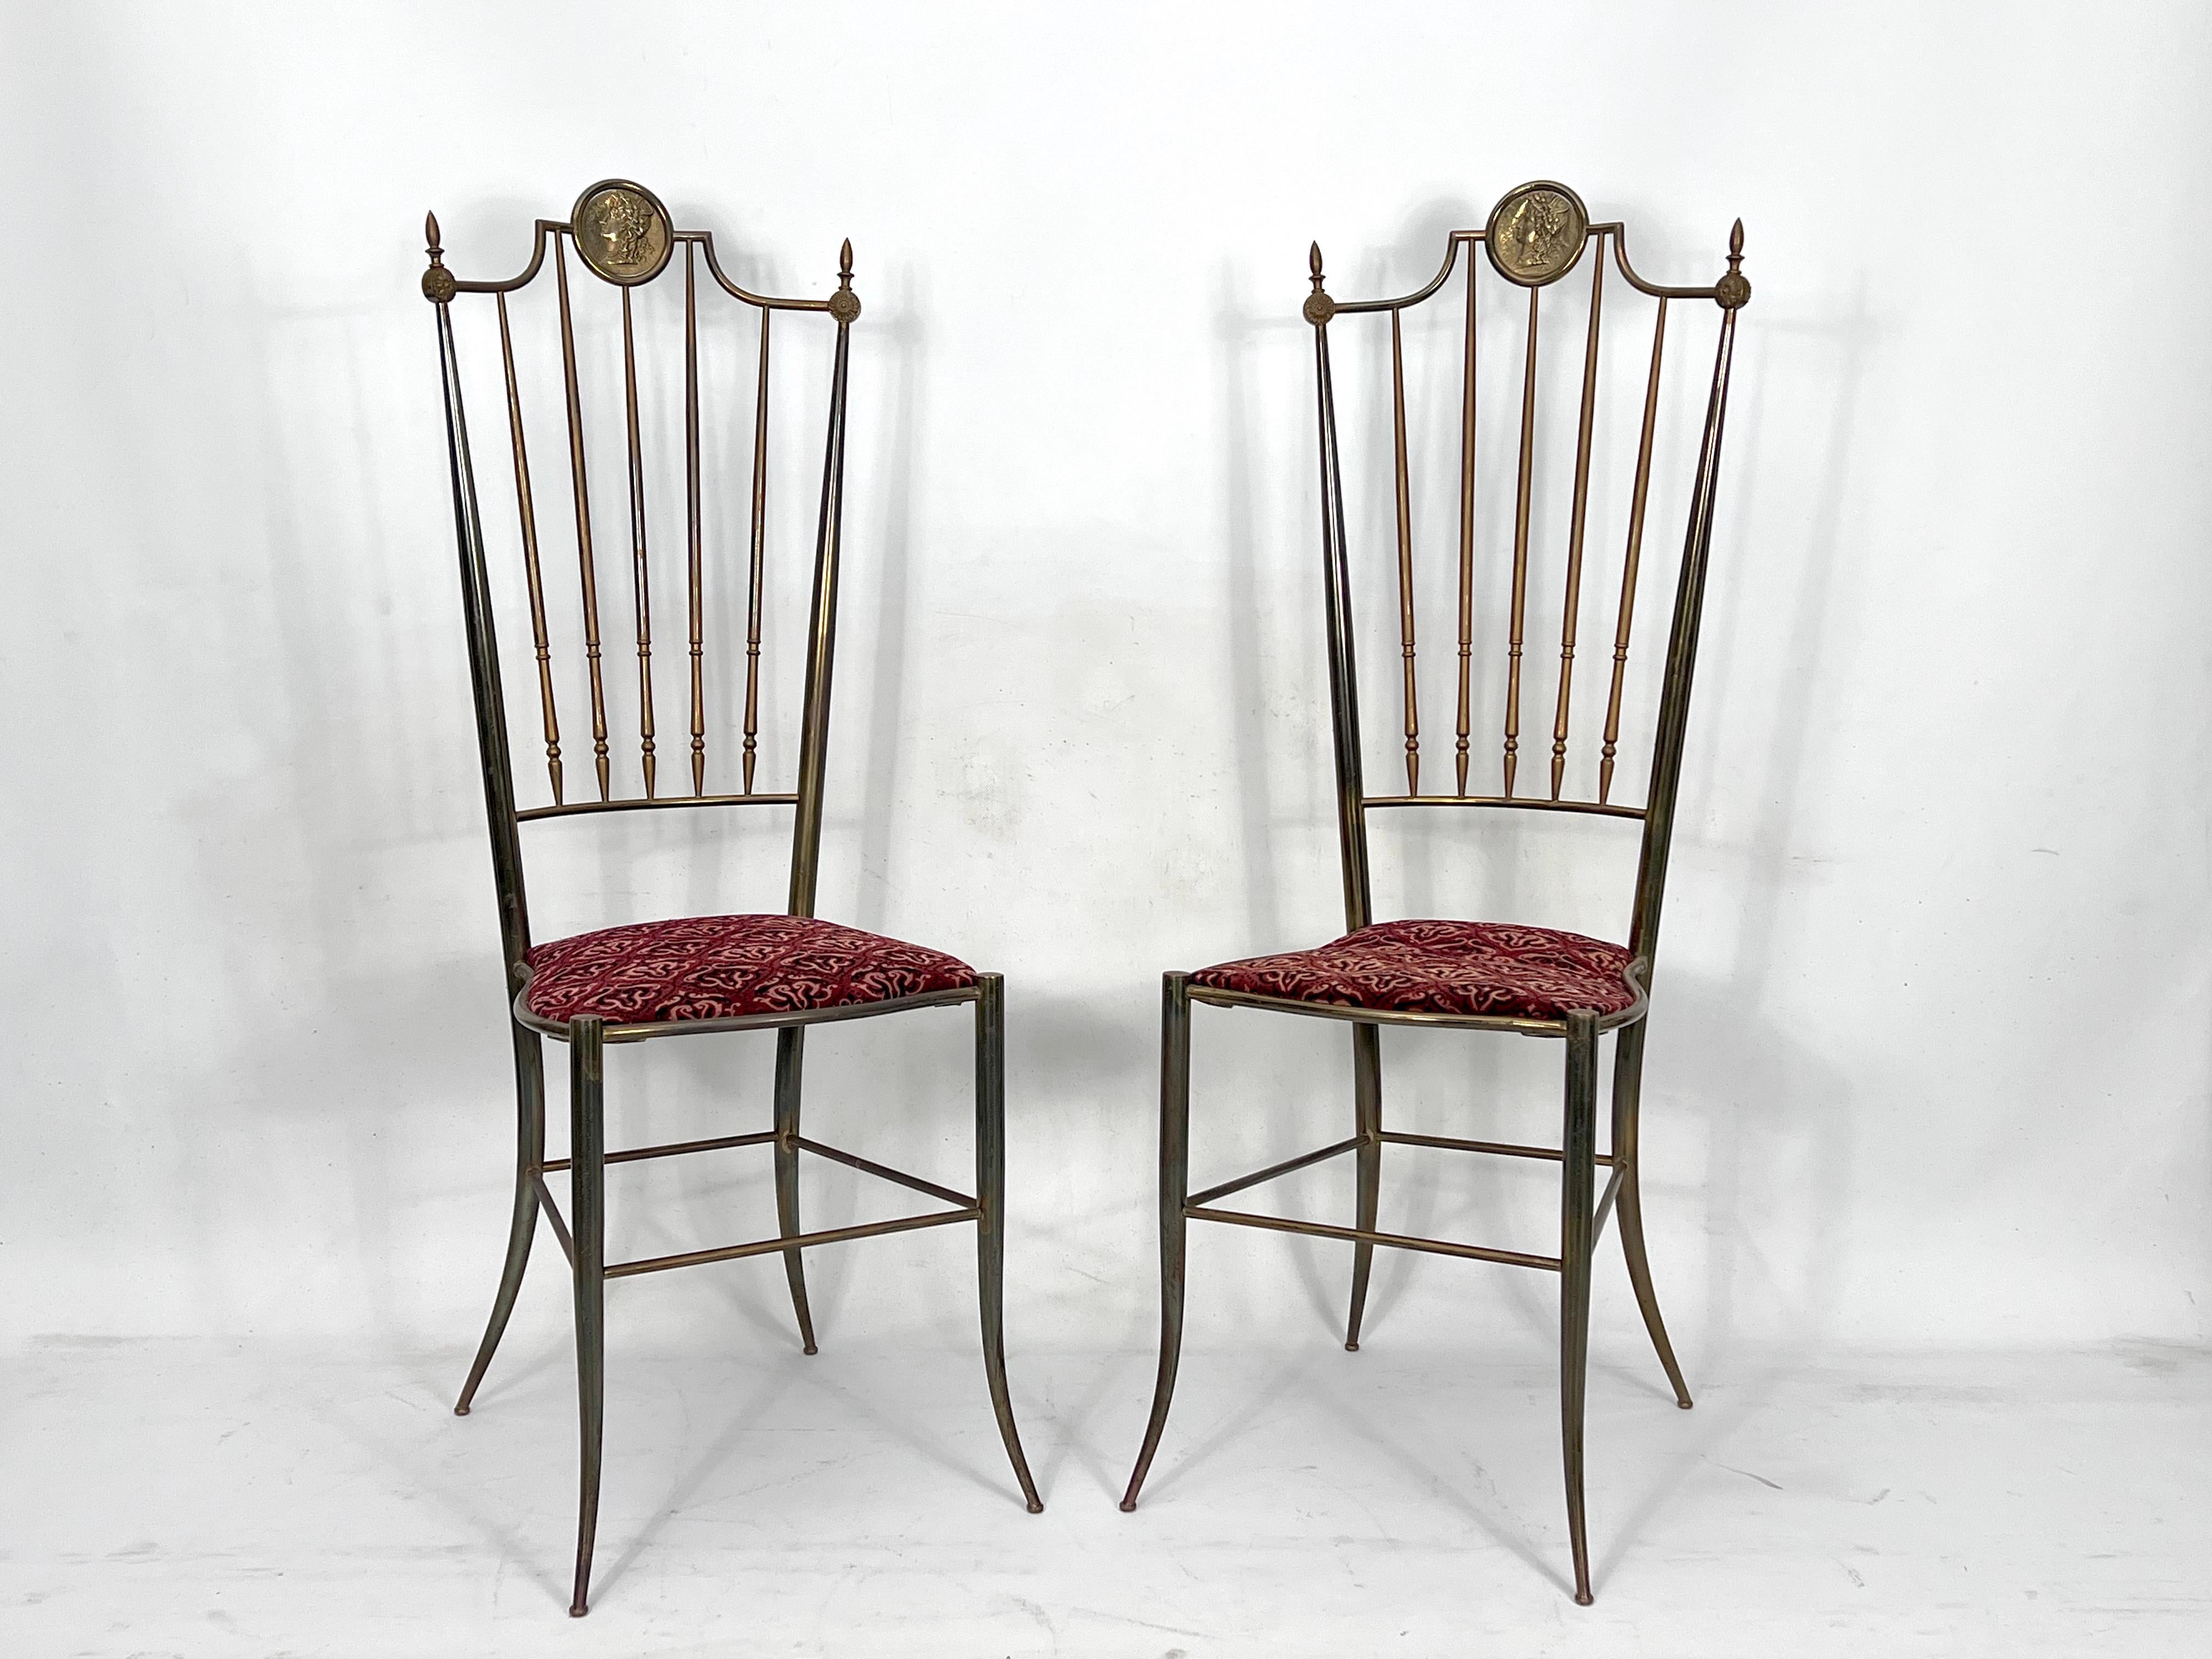 Mid-Century Modern Vintage Pair of Brass Tall Chairs from Chiavari, Italy, 1950s For Sale